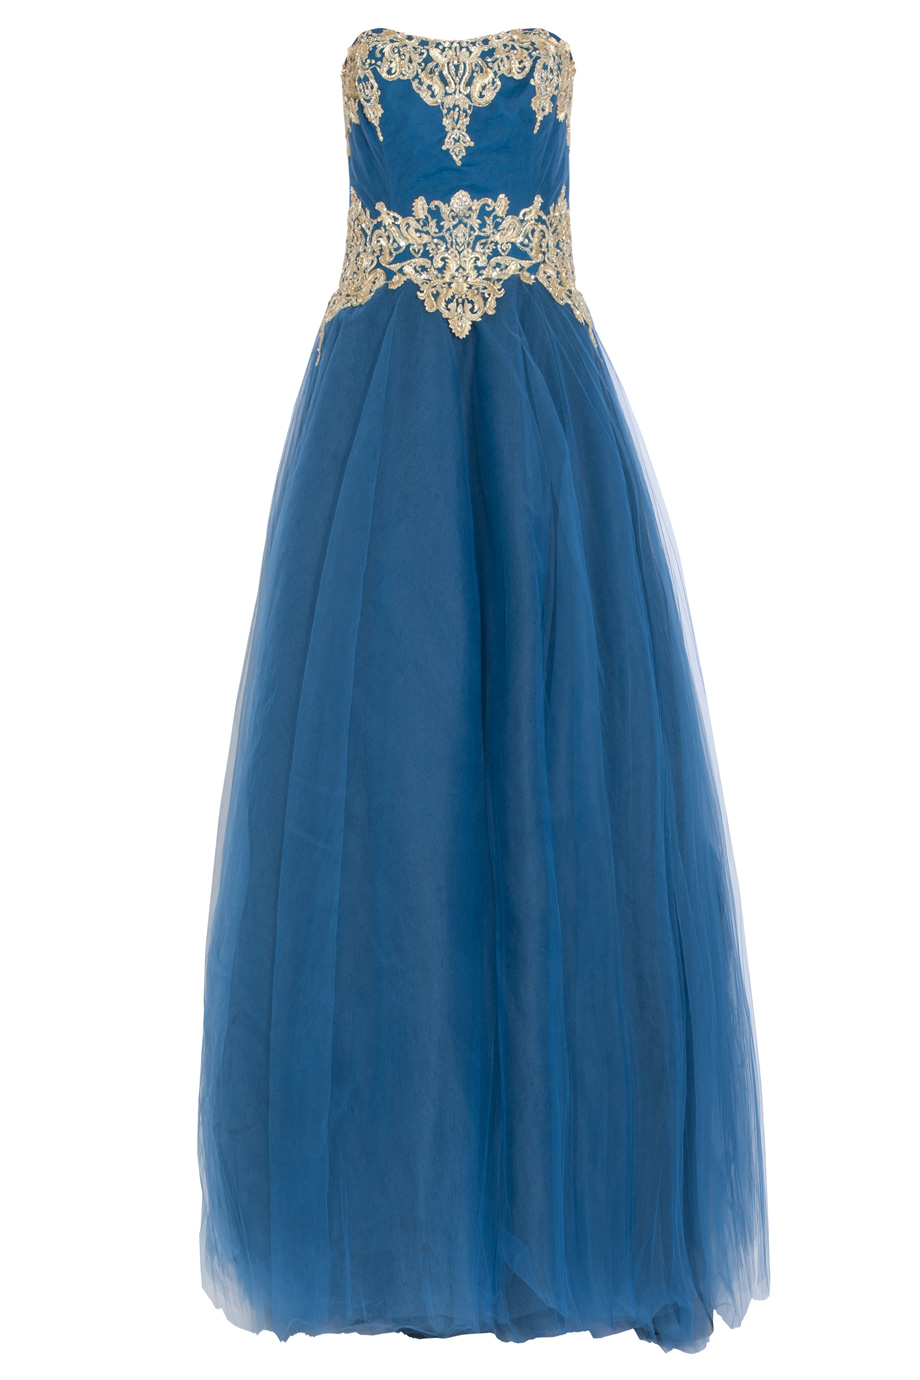 Marchesa Embellished Bodice Tulle Ball Gown in Blue | Lyst